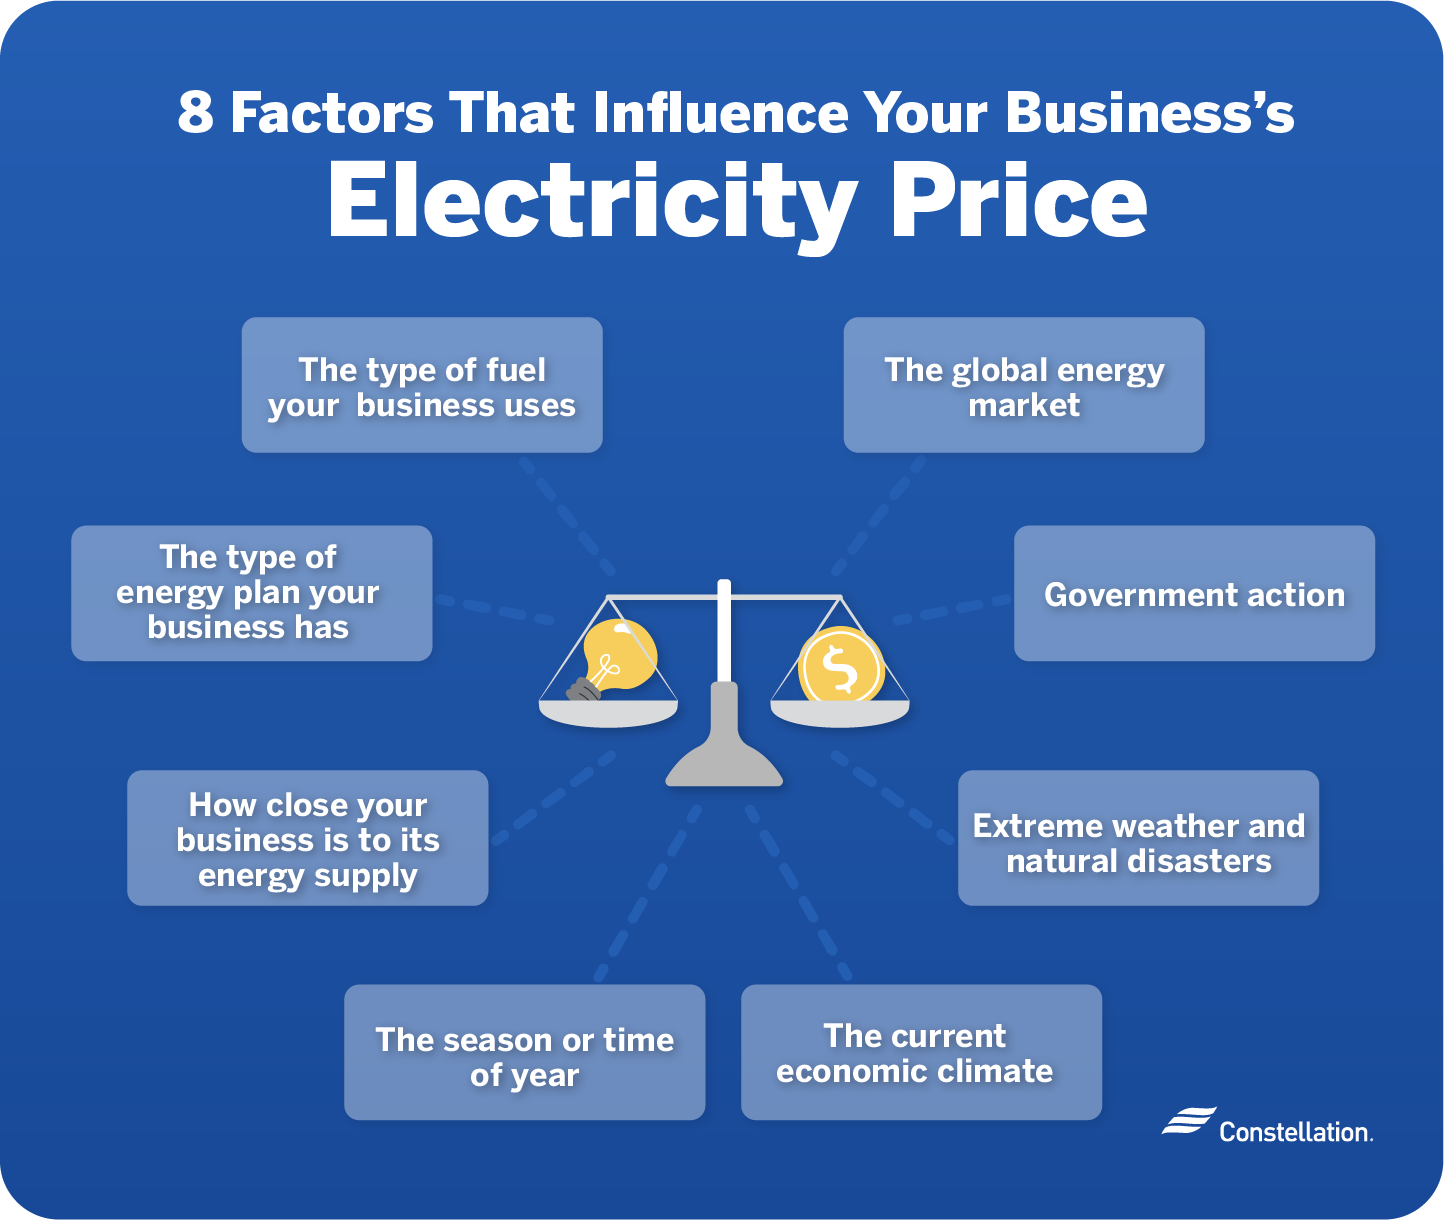 Factors that influence your small business’s electricity price.